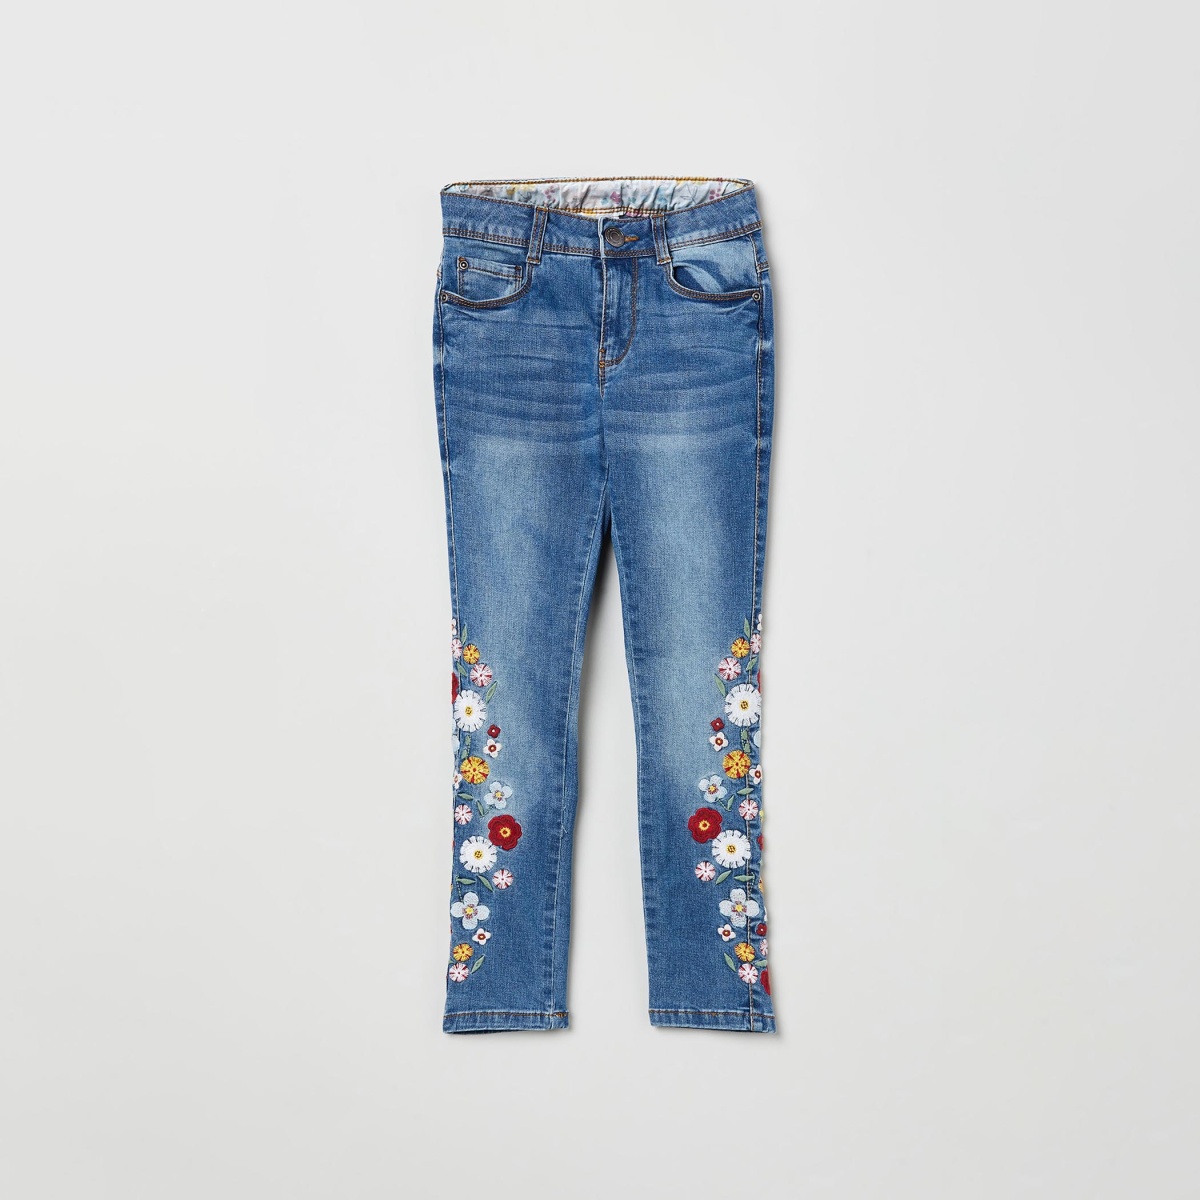 MAX Dark Washed Slim Jeans with Floral Embroidery